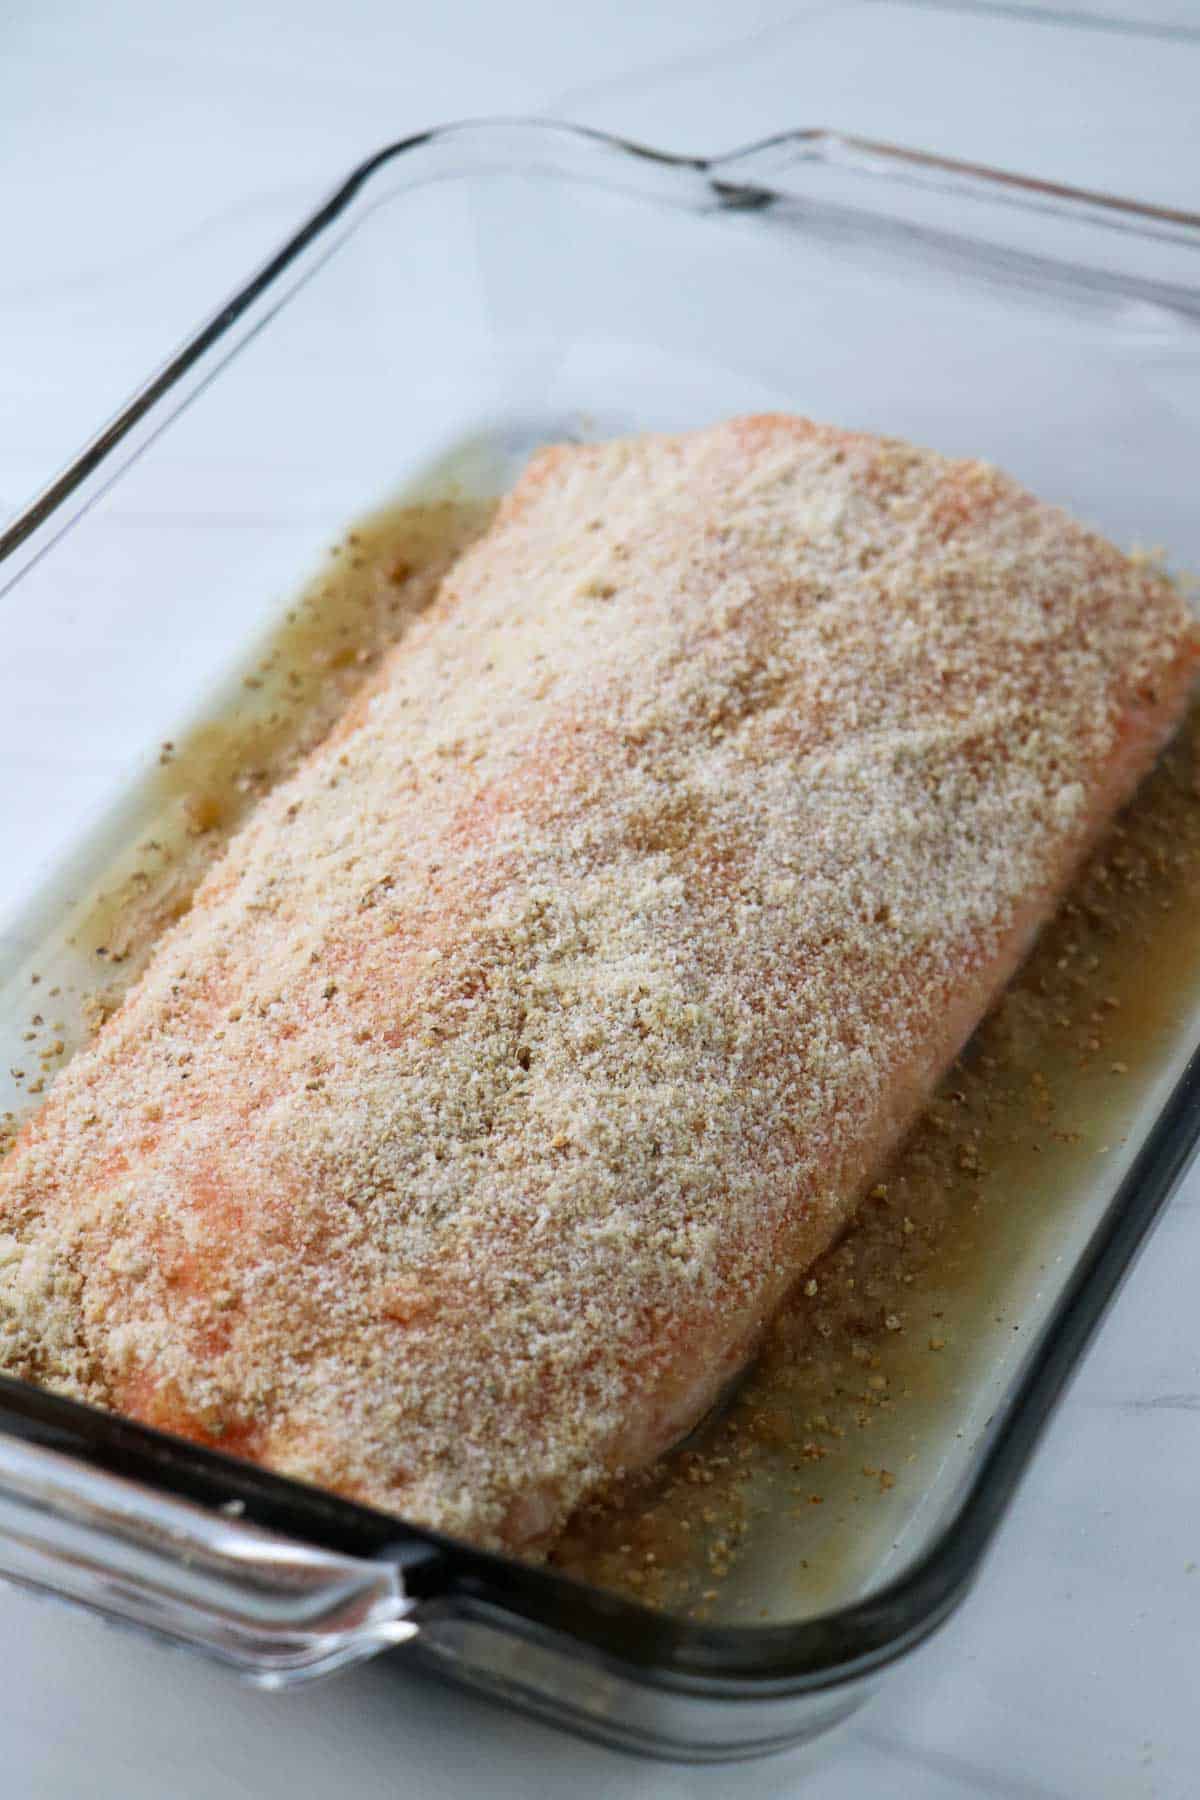 Salmon covered in salt and brown sugar in a glass dish.